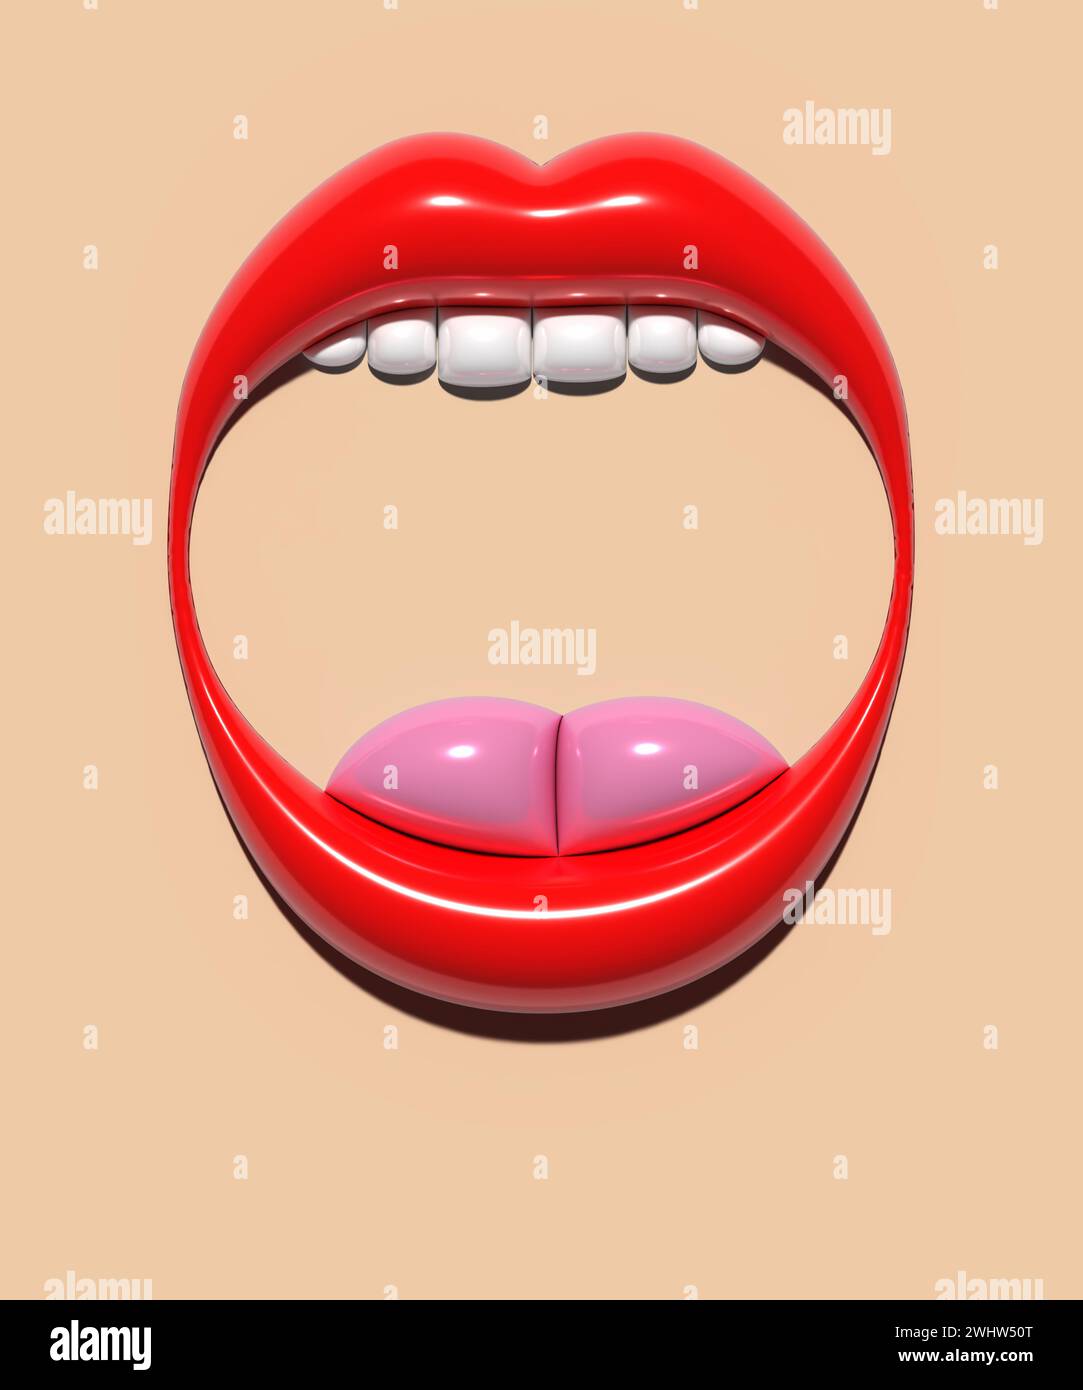 Open mouth with red lips and white teeth, screaming. 3D rendering illustration Stock Photo